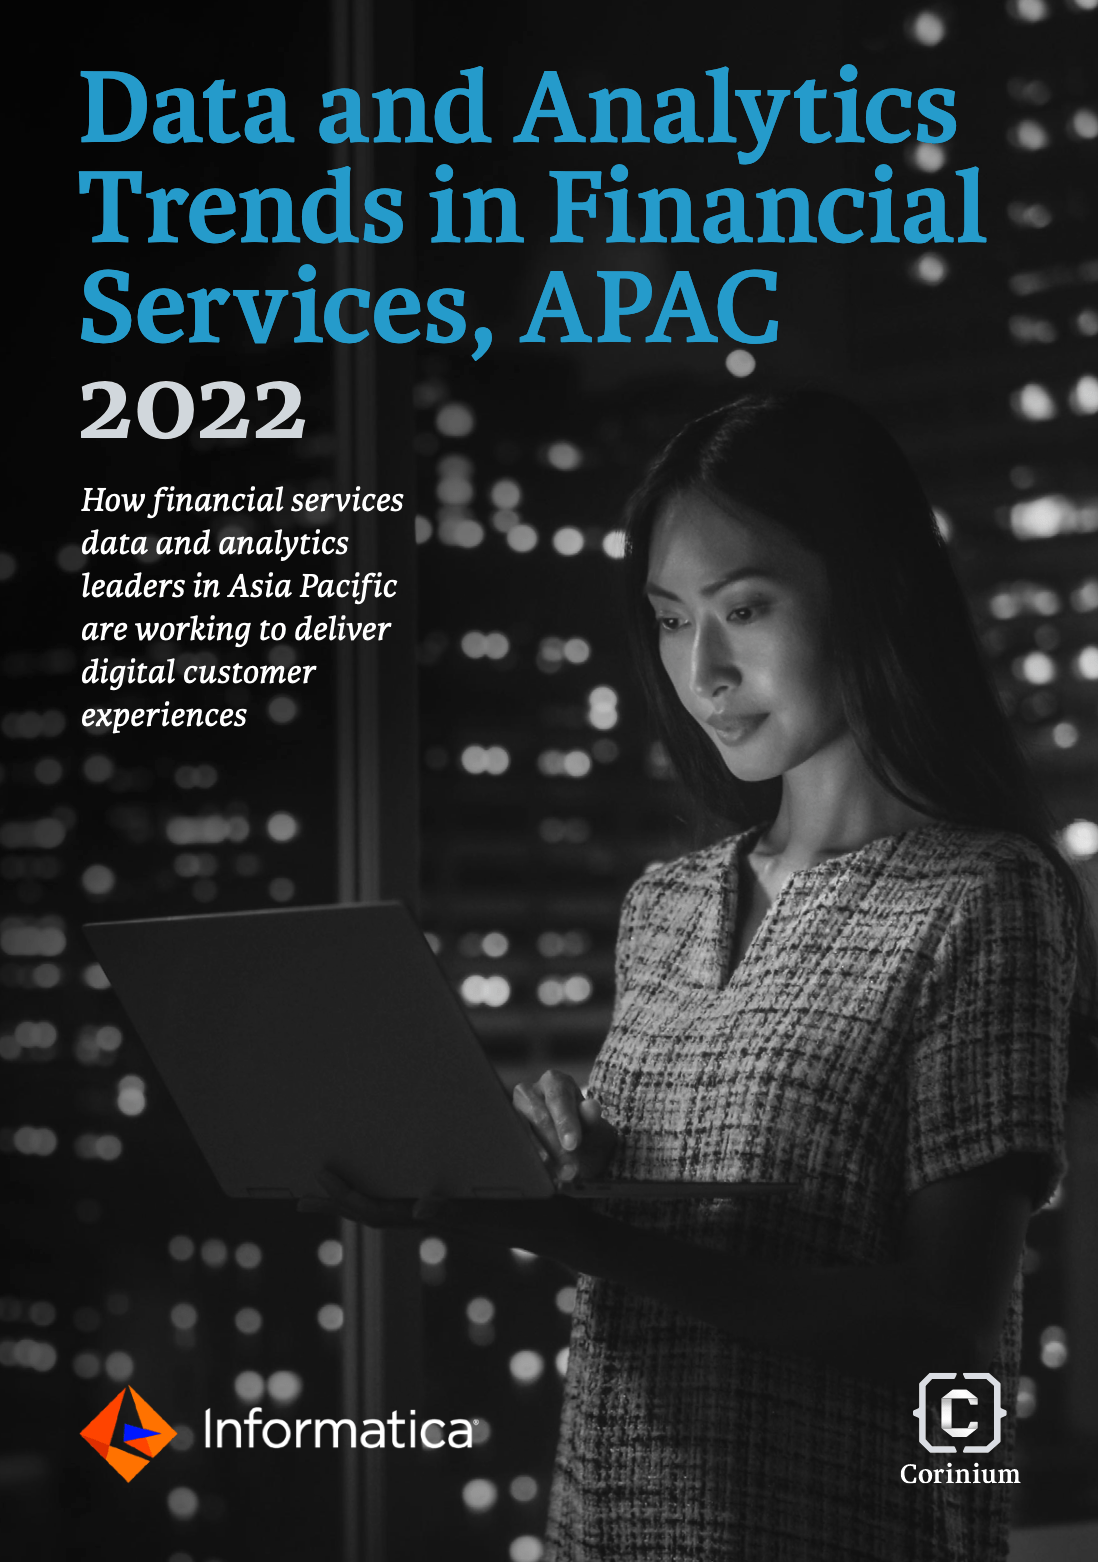 Data and Analytics Trends - Data and Analytics Trends in Financial Services, APAC 2022